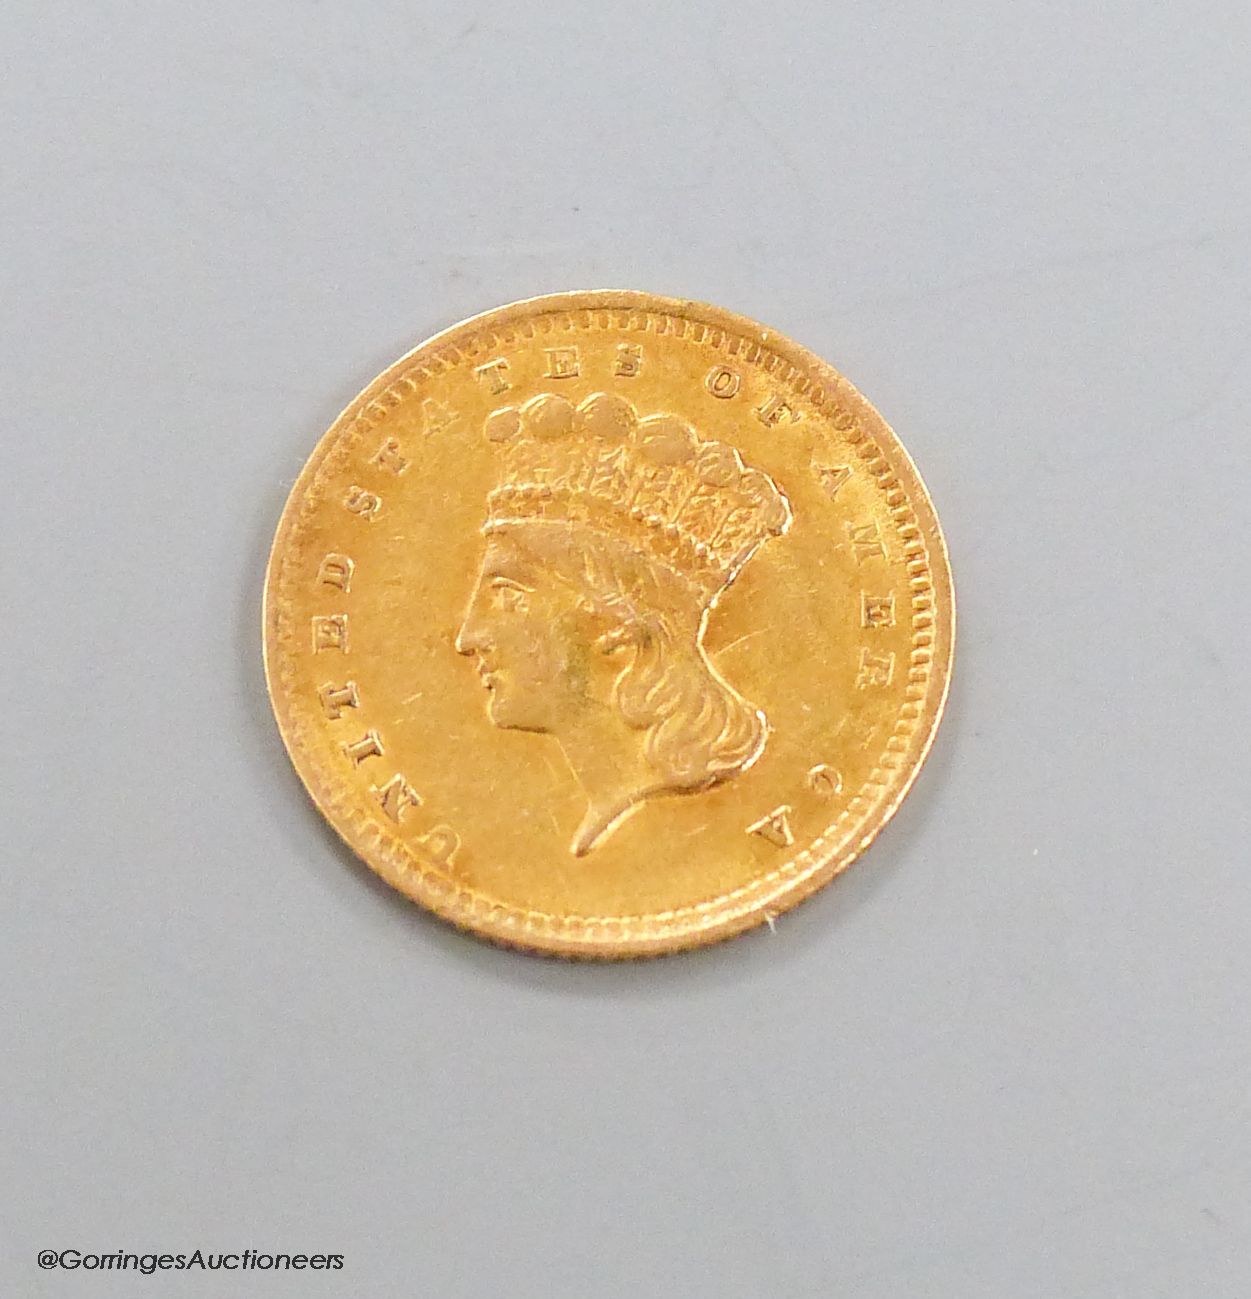 An American 1856 one dollar gold coin